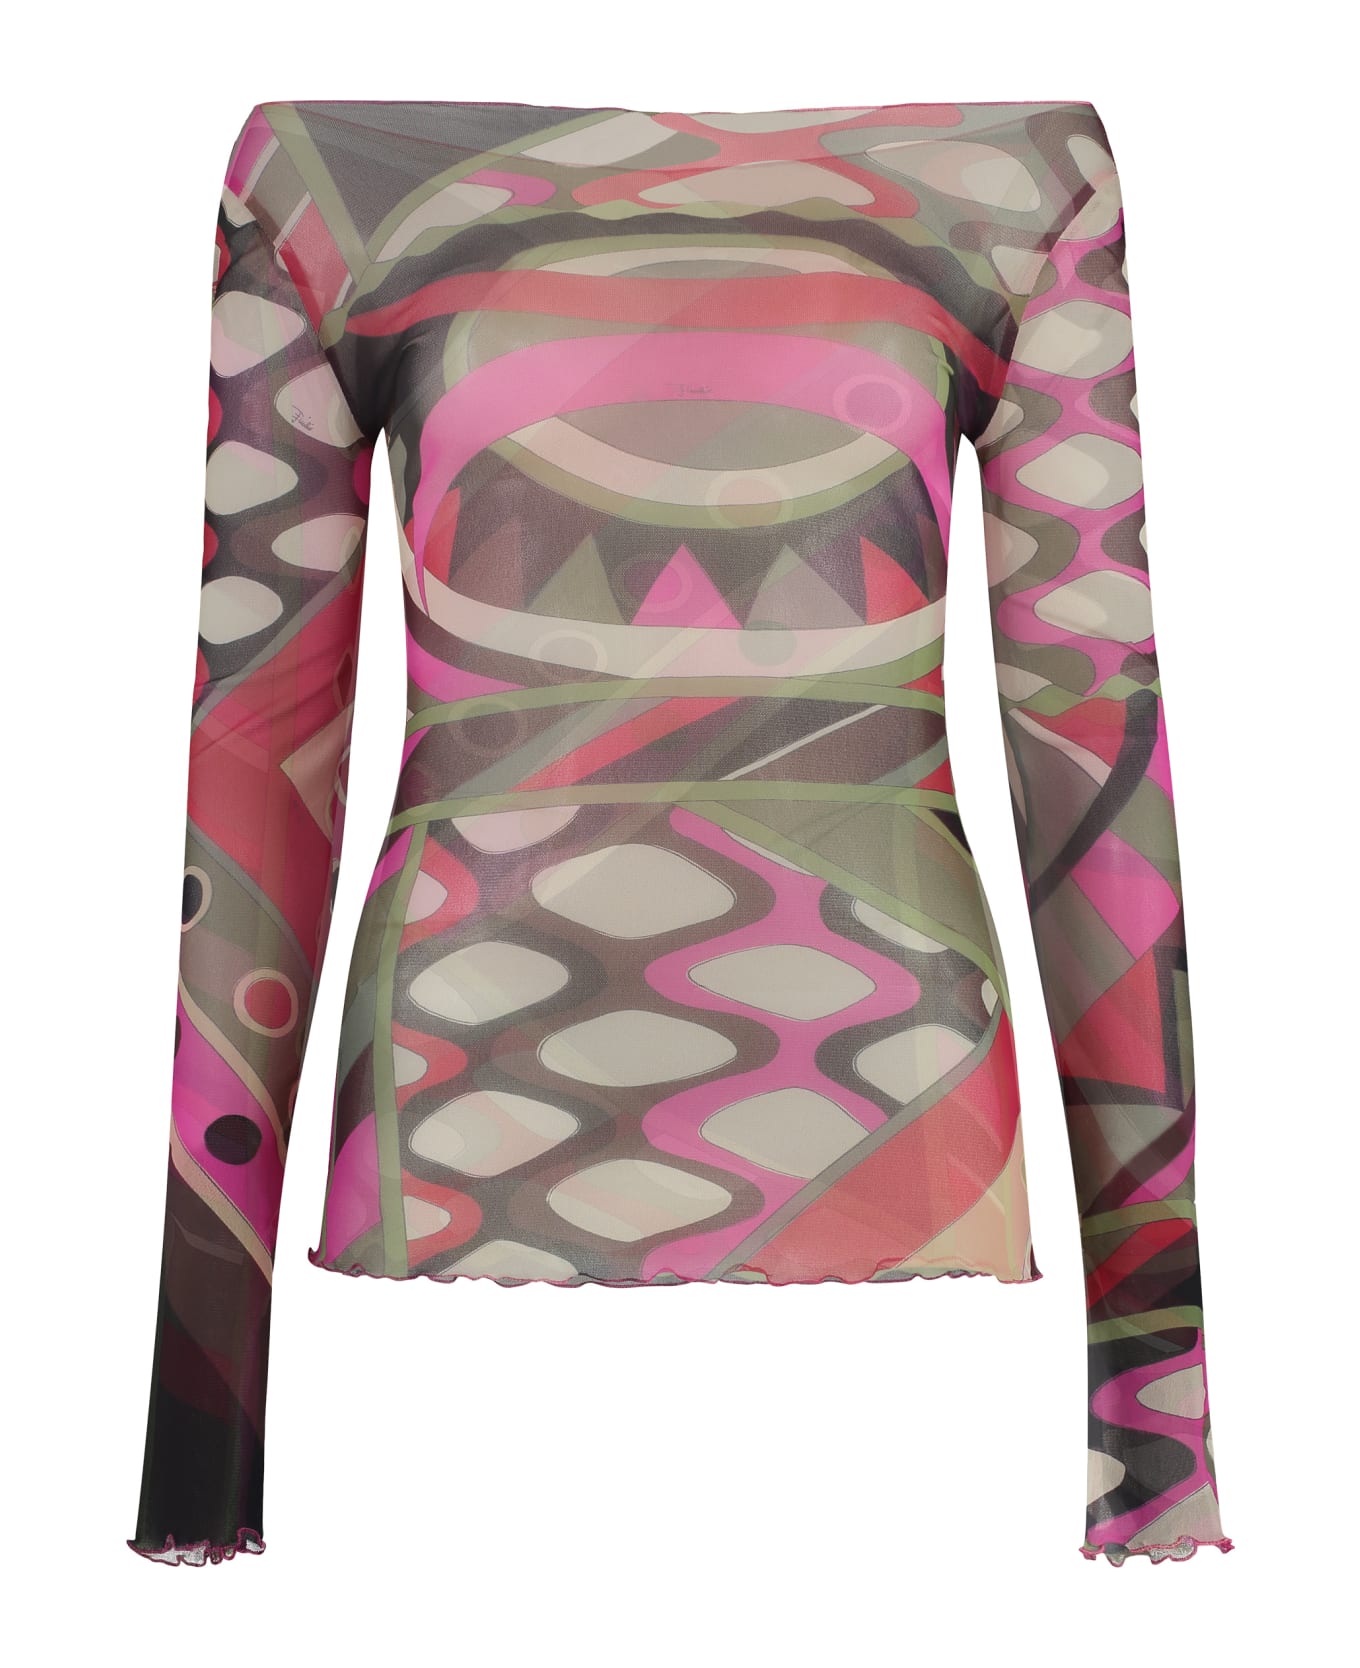 Pucci Printed Long-sleeve Top - Multicolor